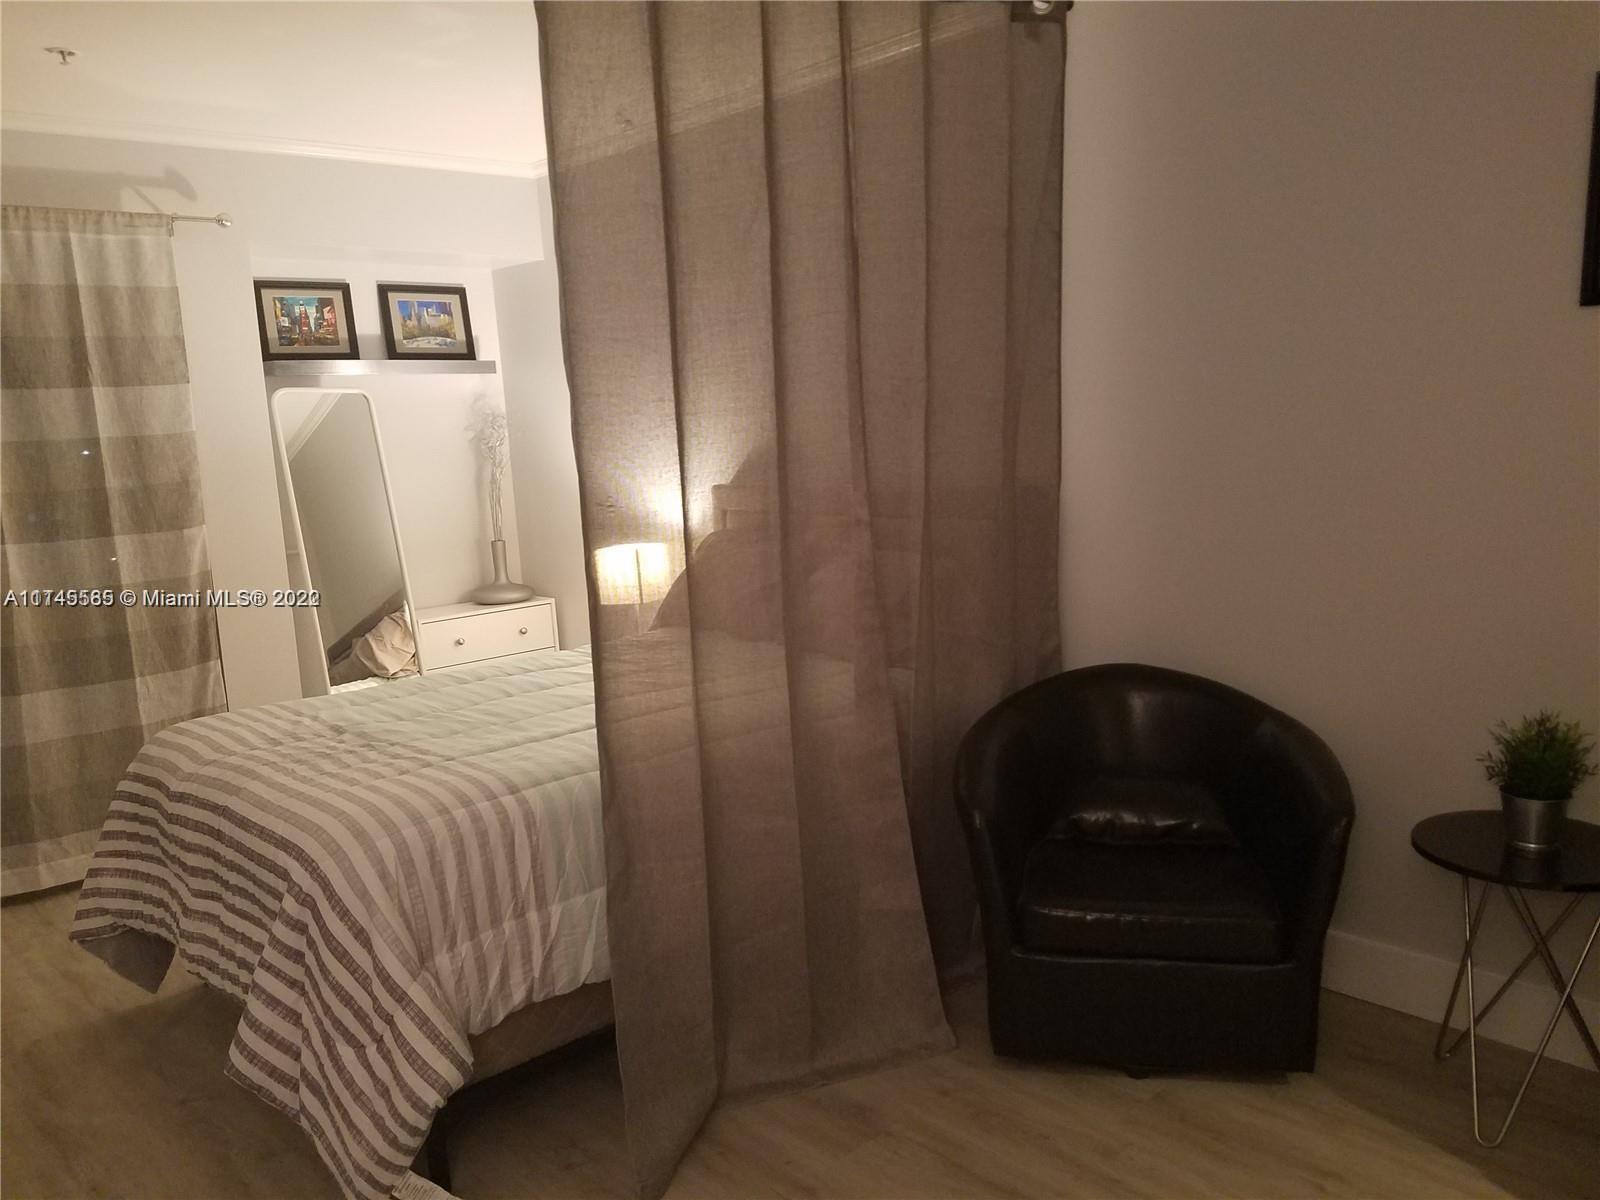 Fully furnished & remodeled studio inside Sunset Place. Unit features a new bathroom, light flooring, kitchen with stainless steel appliances. It has a sitting area, TV,Fully furnished & remodeled studio inside Sunset Place. Unit features a new bathroom, light flooring, kitchen with stainless steel appliances. It has a sitting area, TV, dinette set and bedroom set - just like an extended stay hotel. This is one of only 40 units in the Mall.